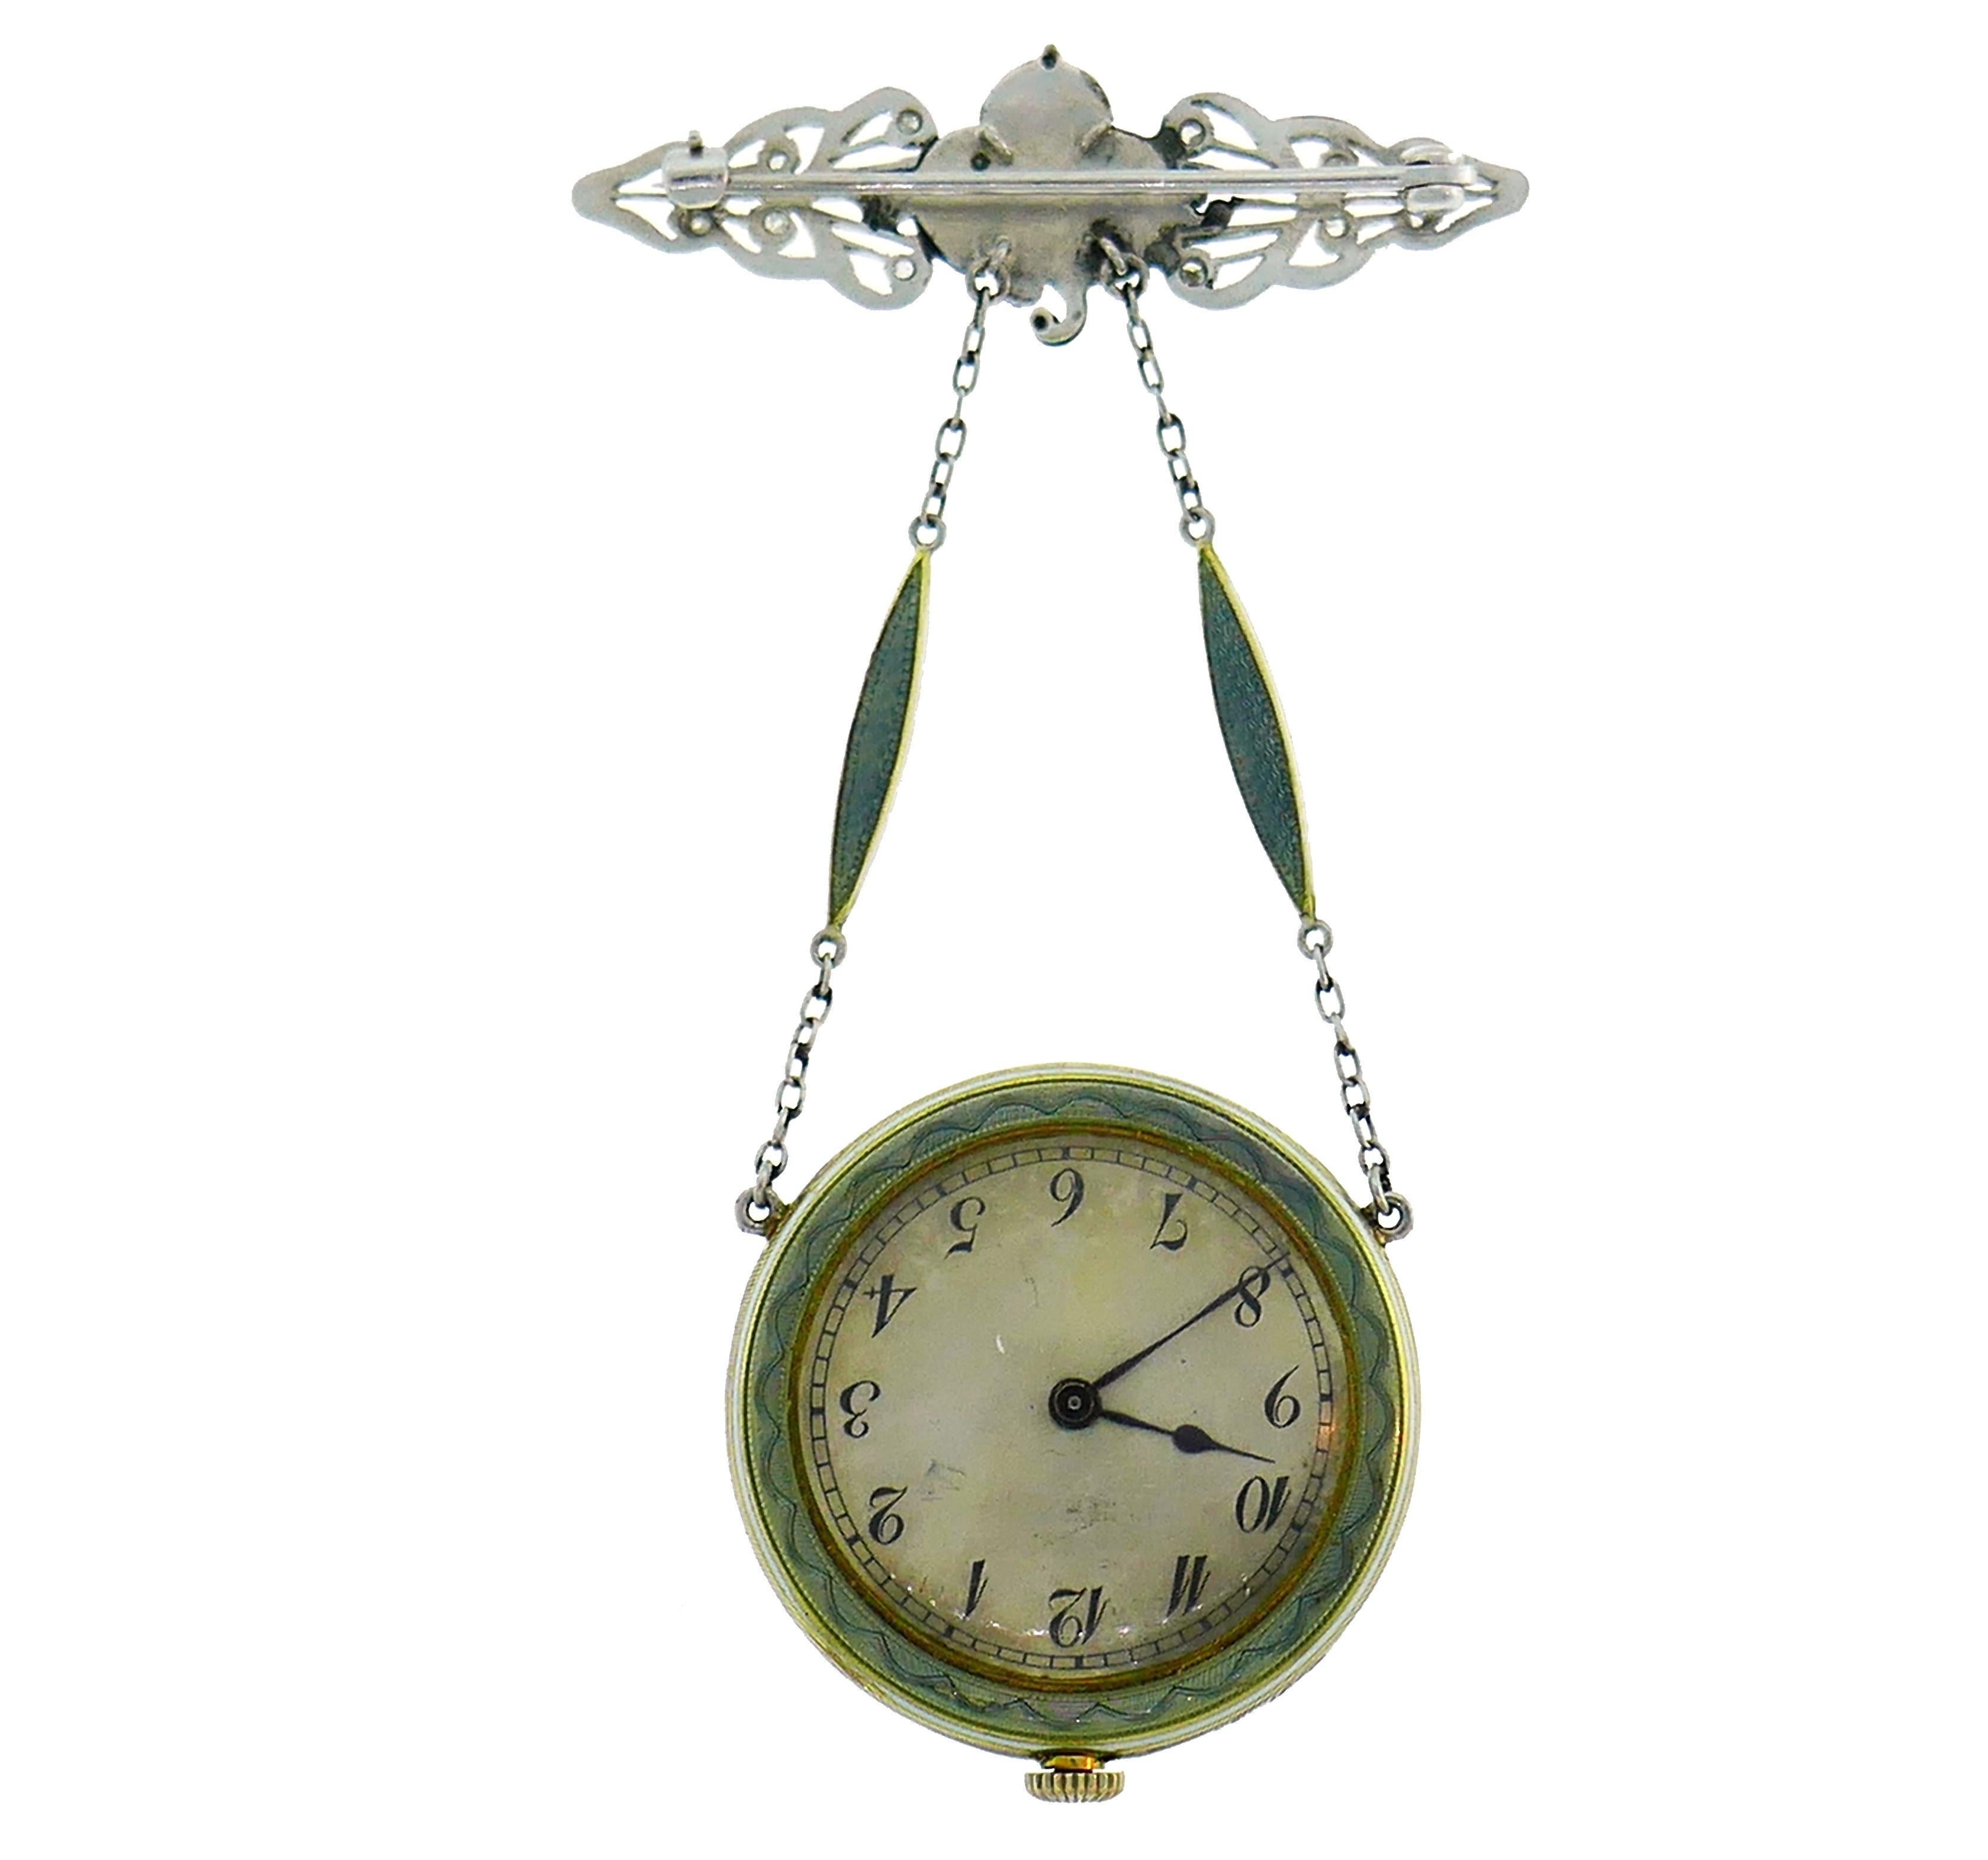 Lovely Art Deco lapel watch pendant created in the 1920s.
The watch is made of platinum, yellow gold, enamel and set with rose cut diamonds. The pin part is made of 14 karat white gold.
Measurements: 2-1/2 x 1-1/2 inches (6.5 x 4 centimeters); watch